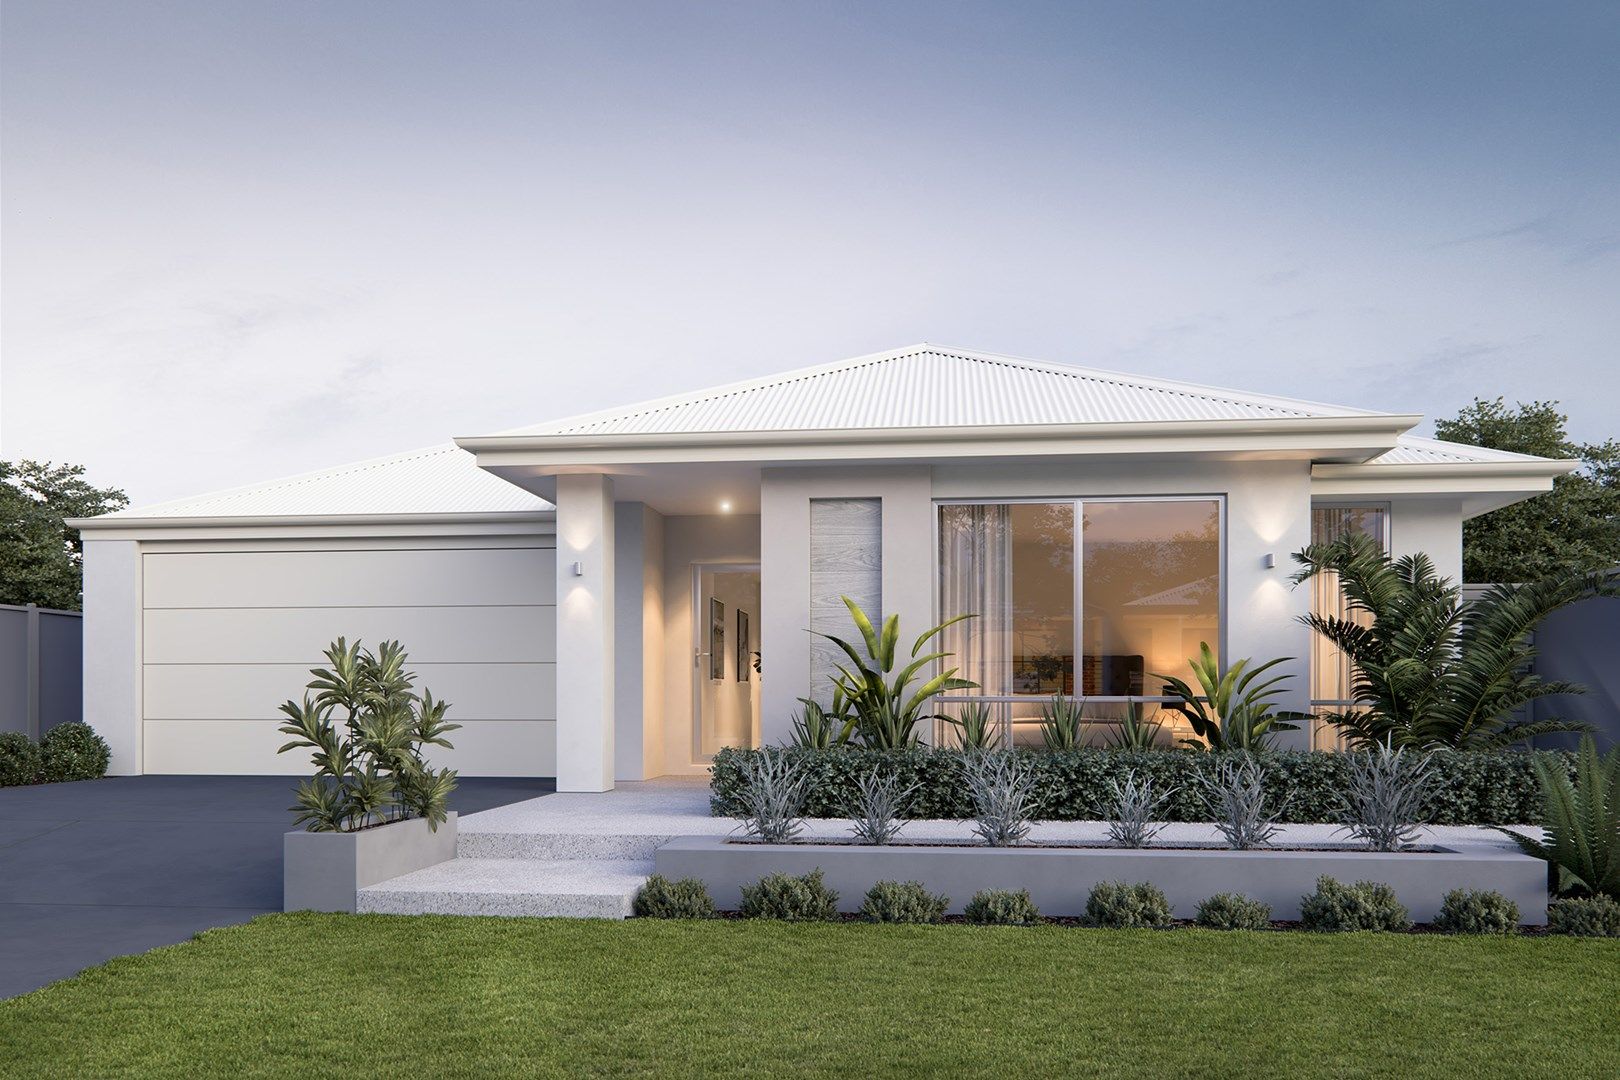 3 bedrooms New House & Land in Lot 2172 Sleaford Approach GOLDEN BAY WA, 6174